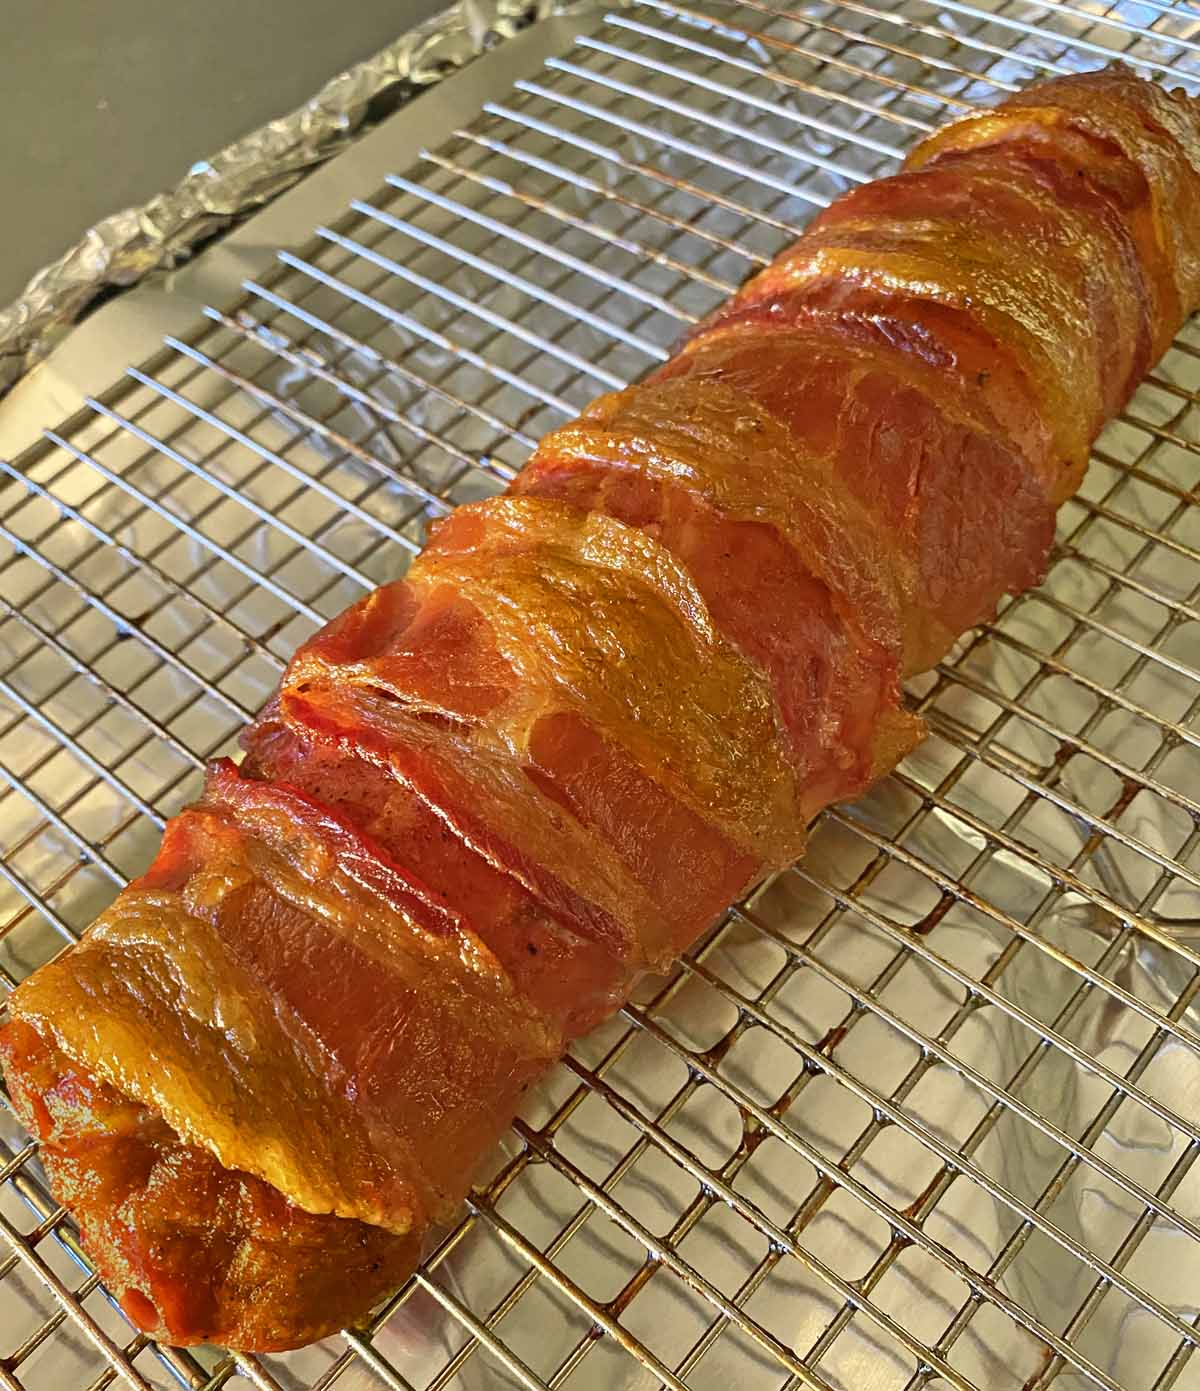 Just cooked, bacon-wrapped pork tenderloin is shown on a baking sheet after being pulled from the smoker.